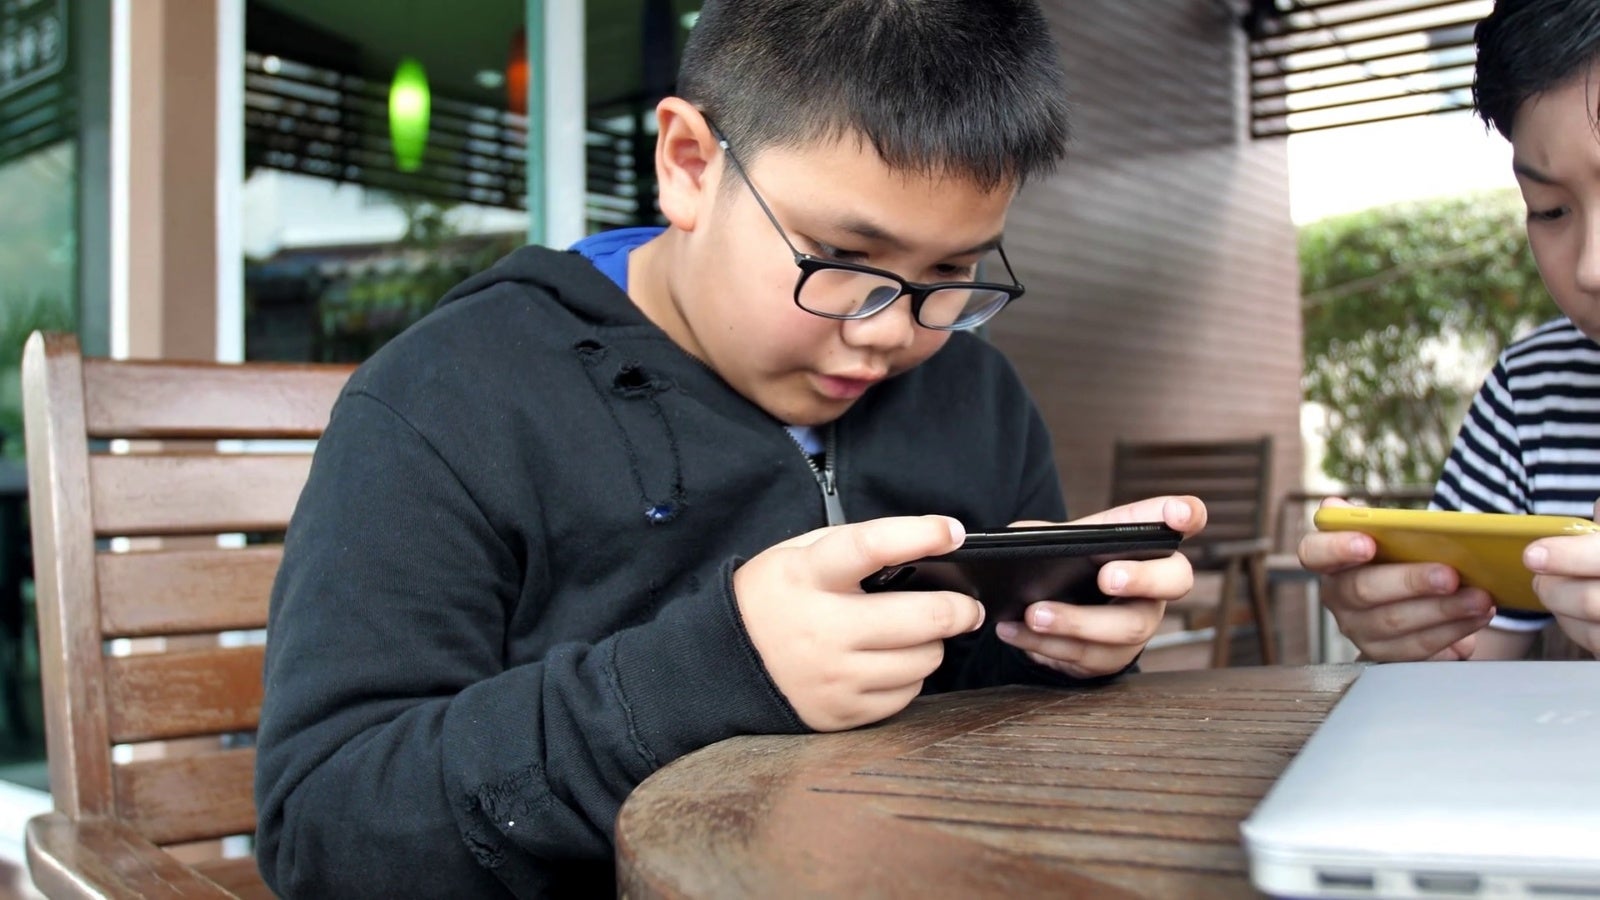 Videoblocks Slow Motion 4K Happy Asian Boy Playing Mobile Game Online On Smart Phone Together Boy And Friend Confer With Strategy Having Fun Hnygoa3Tq Thumbnail Full01